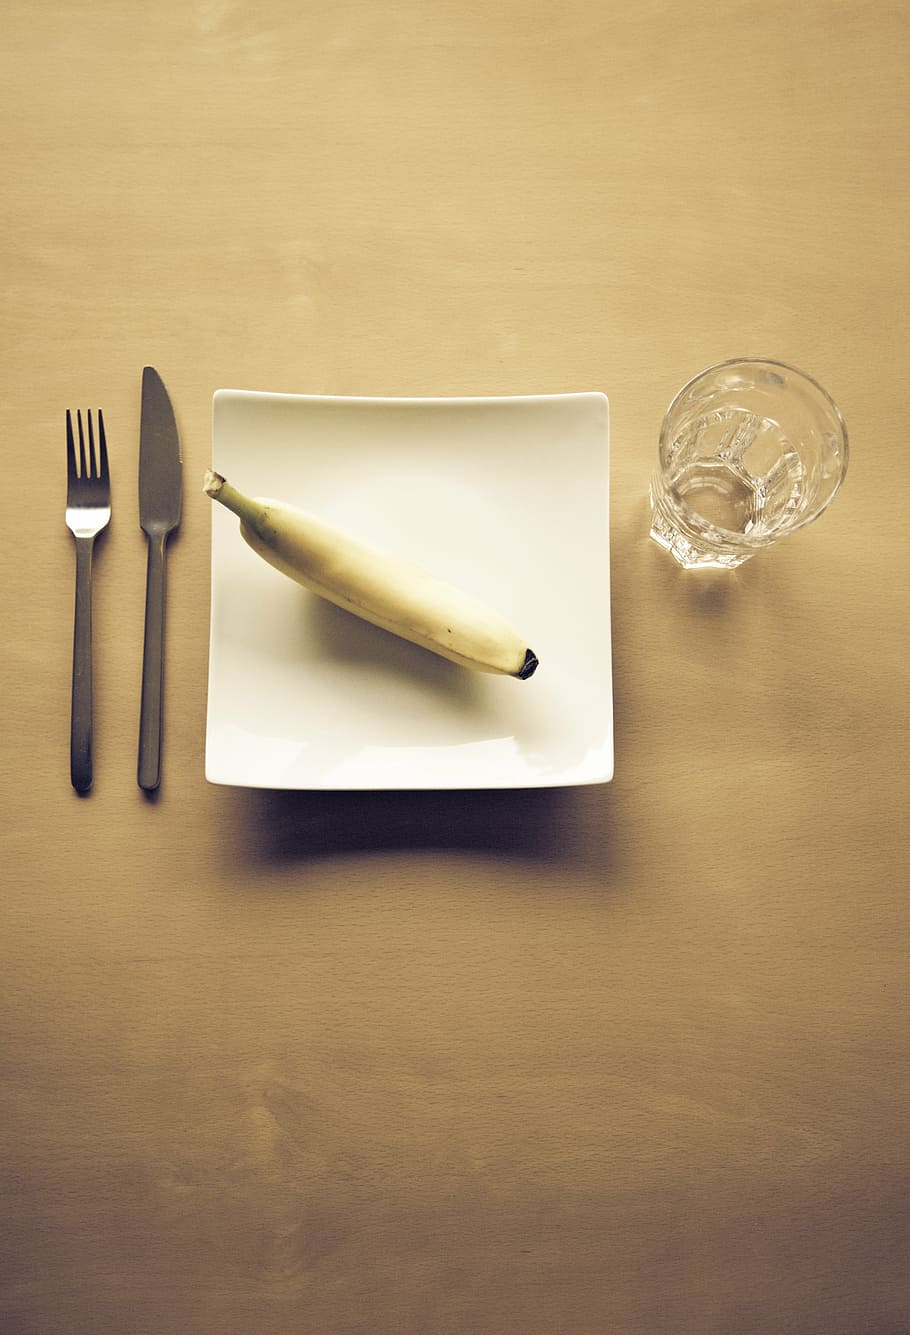 clear, rock glass, white, ceramic, plate, banana, top, fork, knife, drinking